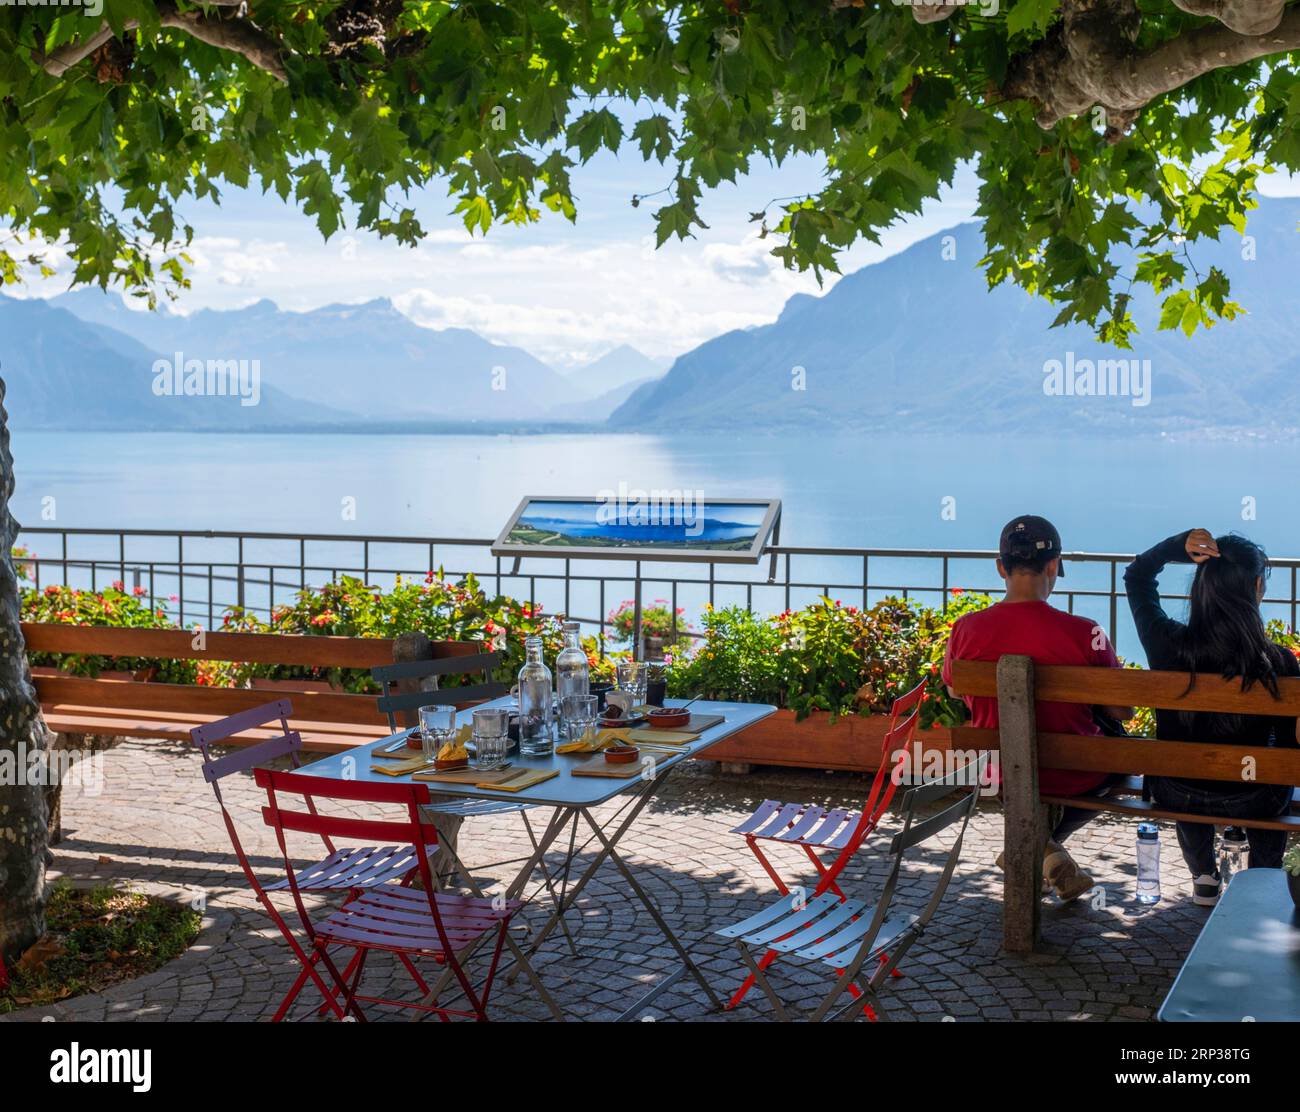 View over lake Geneva from the terrace at the Cafe de la Poste, Chexbres, Canton of Vaud, Switzerland Stock Photo